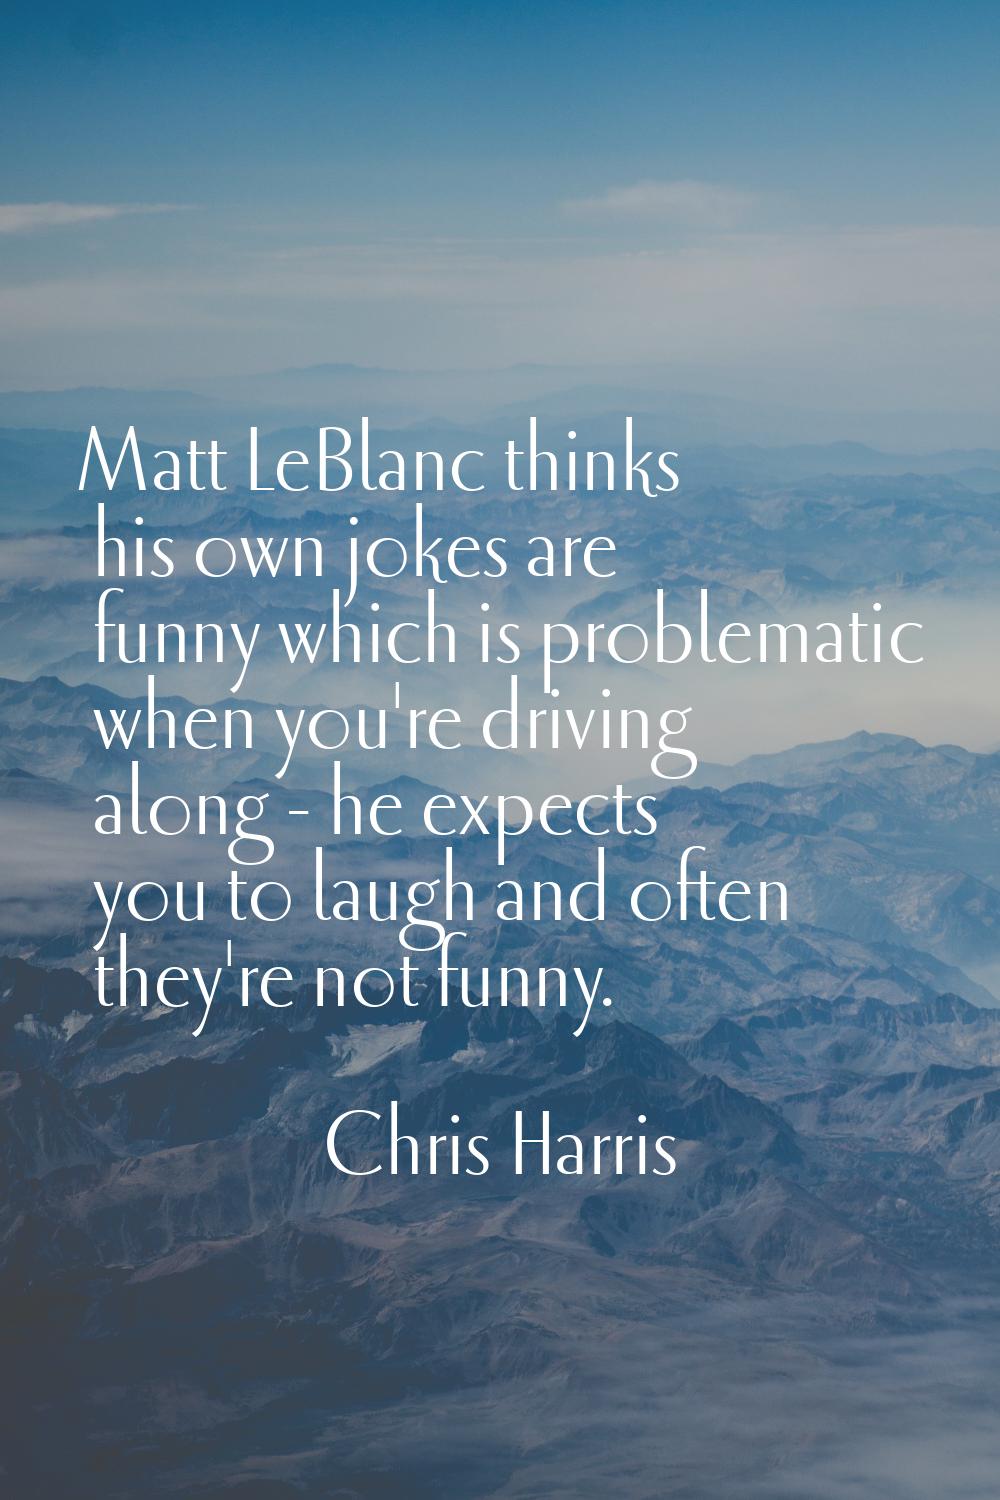 Matt LeBlanc thinks his own jokes are funny which is problematic when you're driving along - he exp